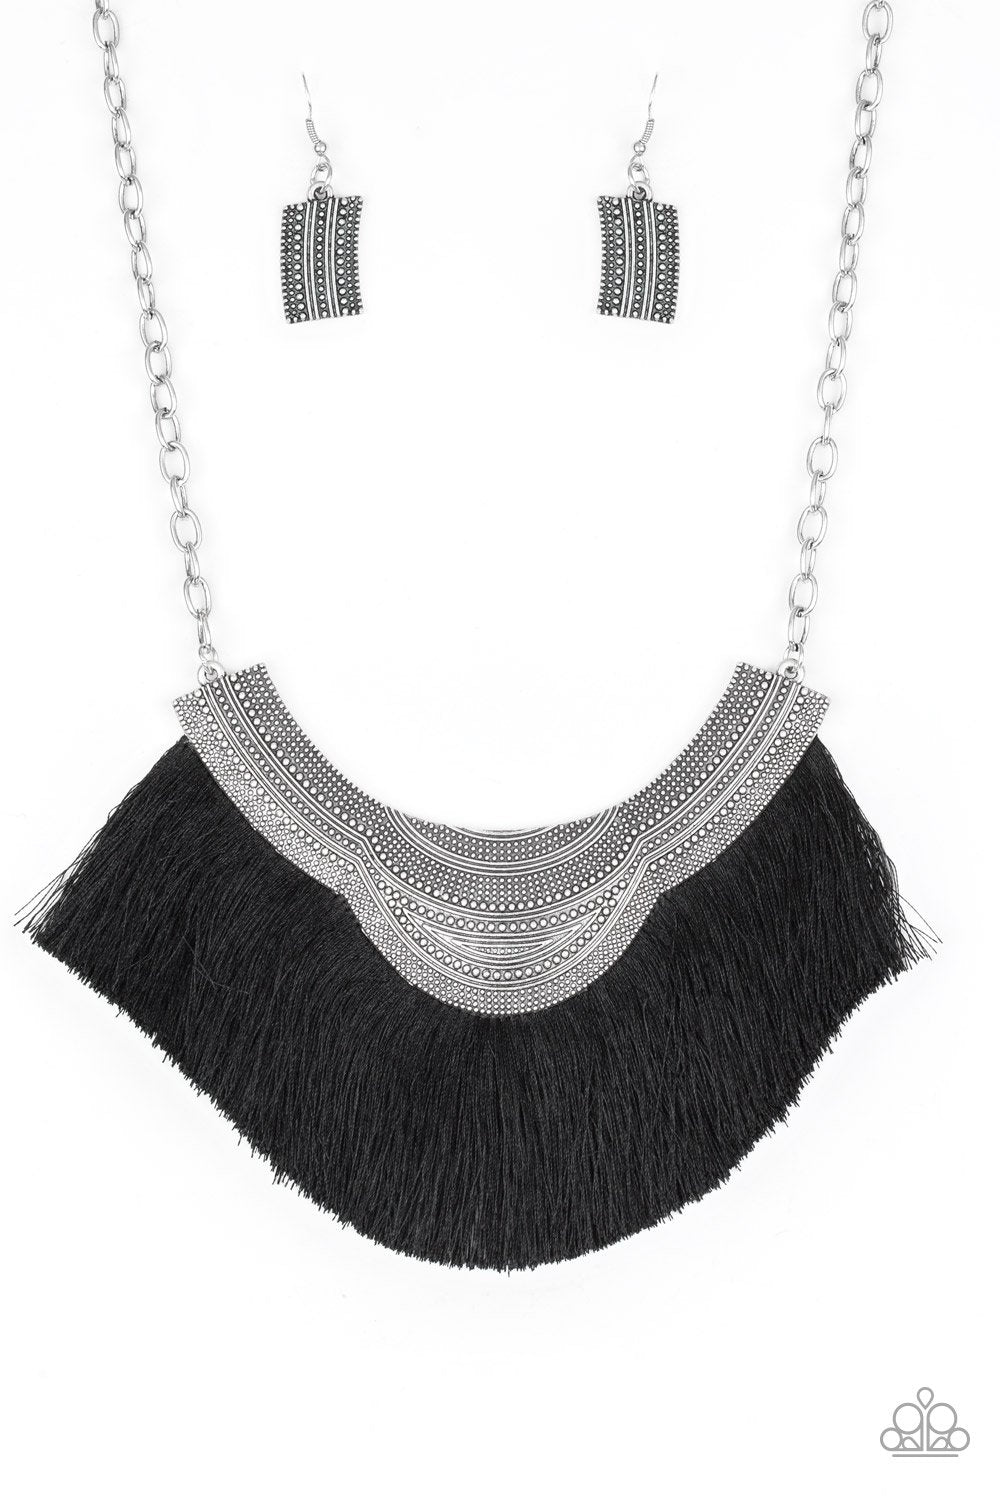 My Pharaoh Lady Black Fringe Necklace - Paparazzi Accessories-CarasShop.com - $5 Jewelry by Cara Jewels